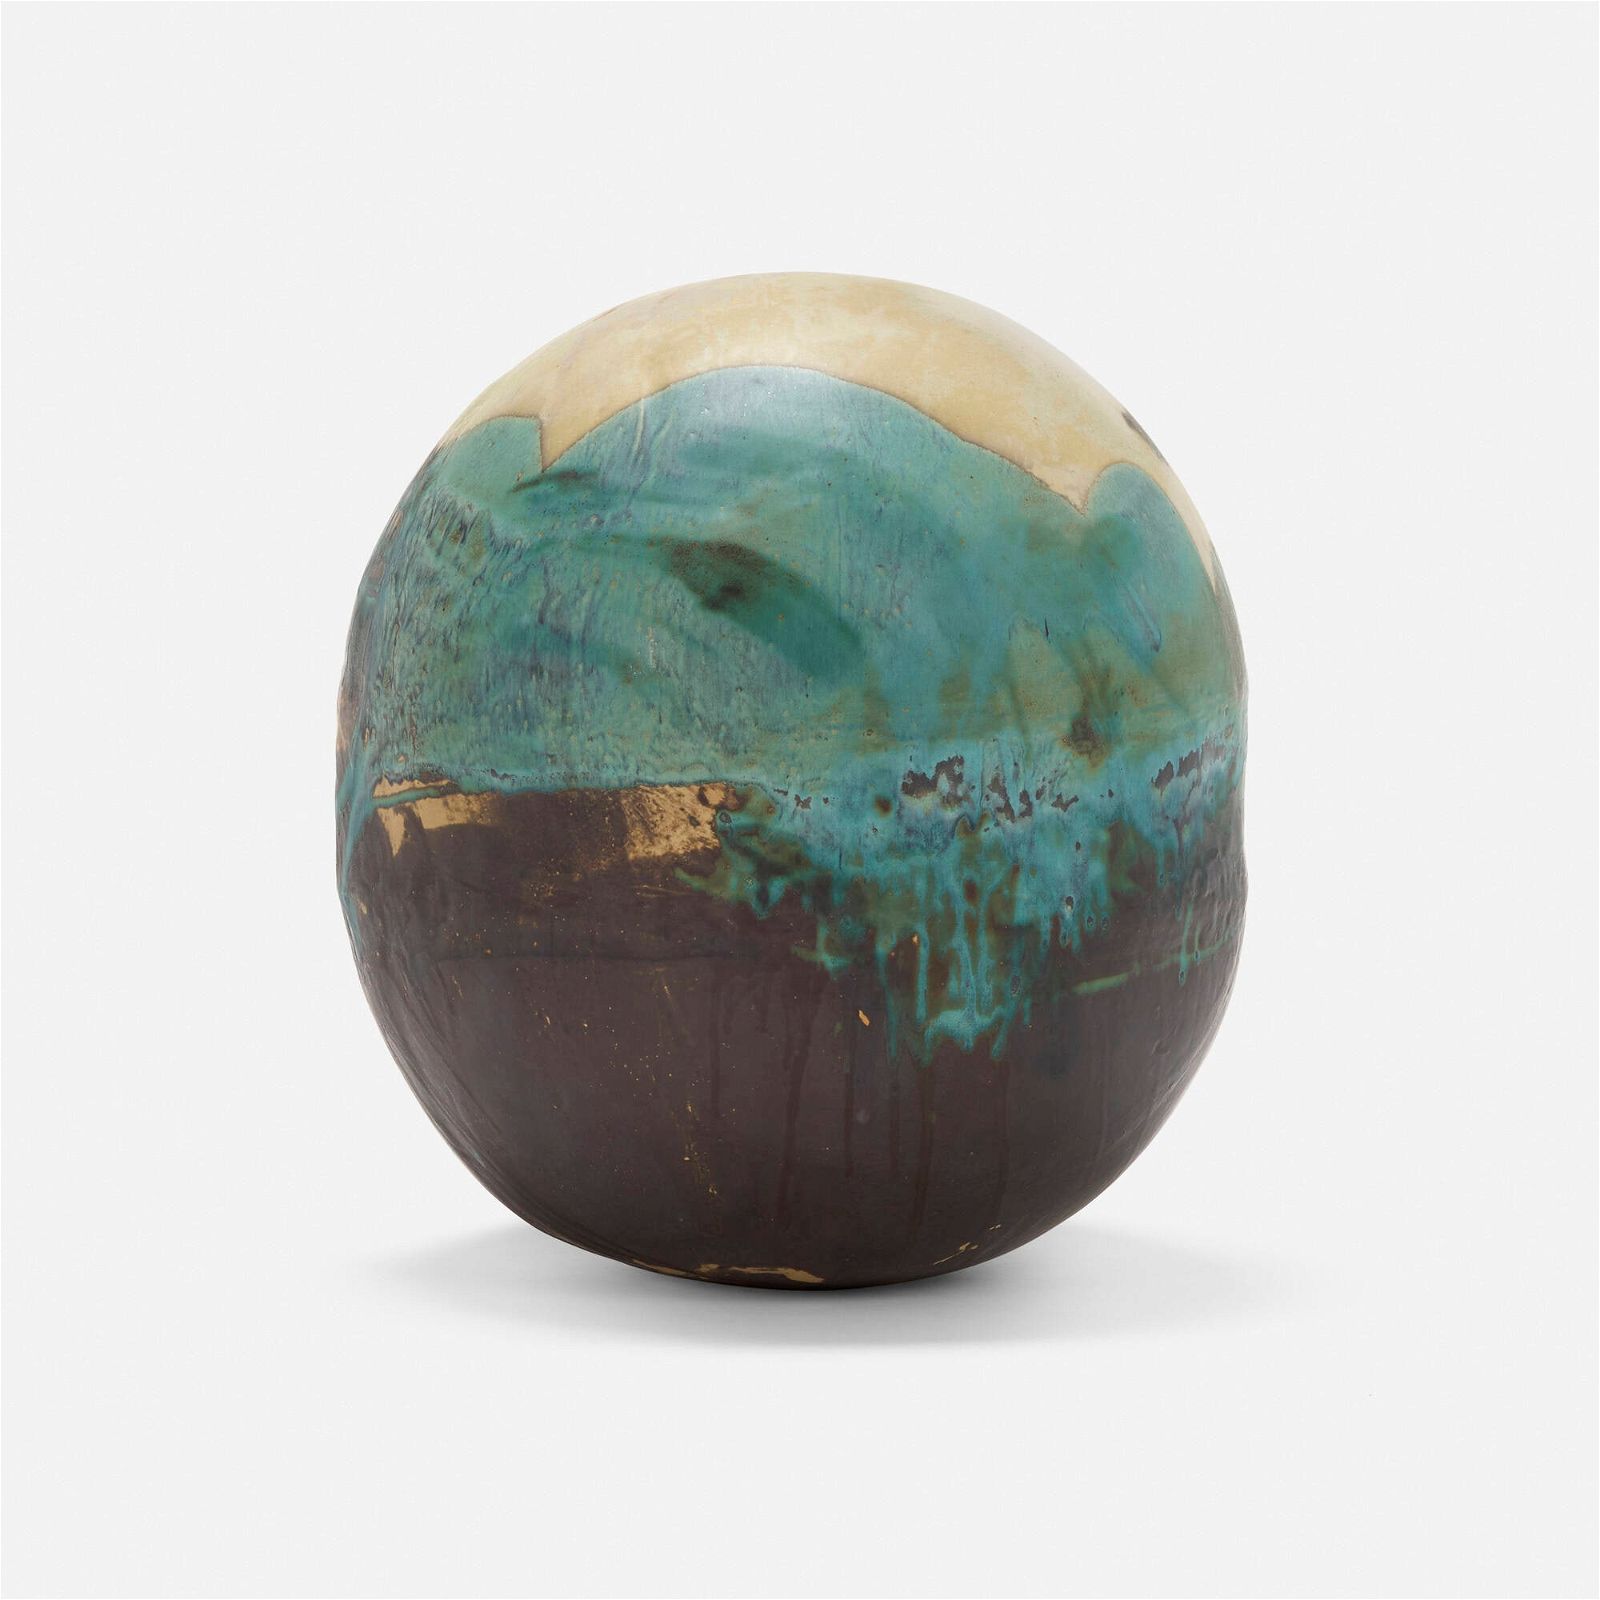 An alternate view of Toshiko Takaezu's ‘Spring Moon’ vessel with a rattle embedded inside it. The piece brought $140,000 plus the buyer’s premium in October 2023. Image courtesy of Rago Arts and Auction Center and LiveAuctioneers.